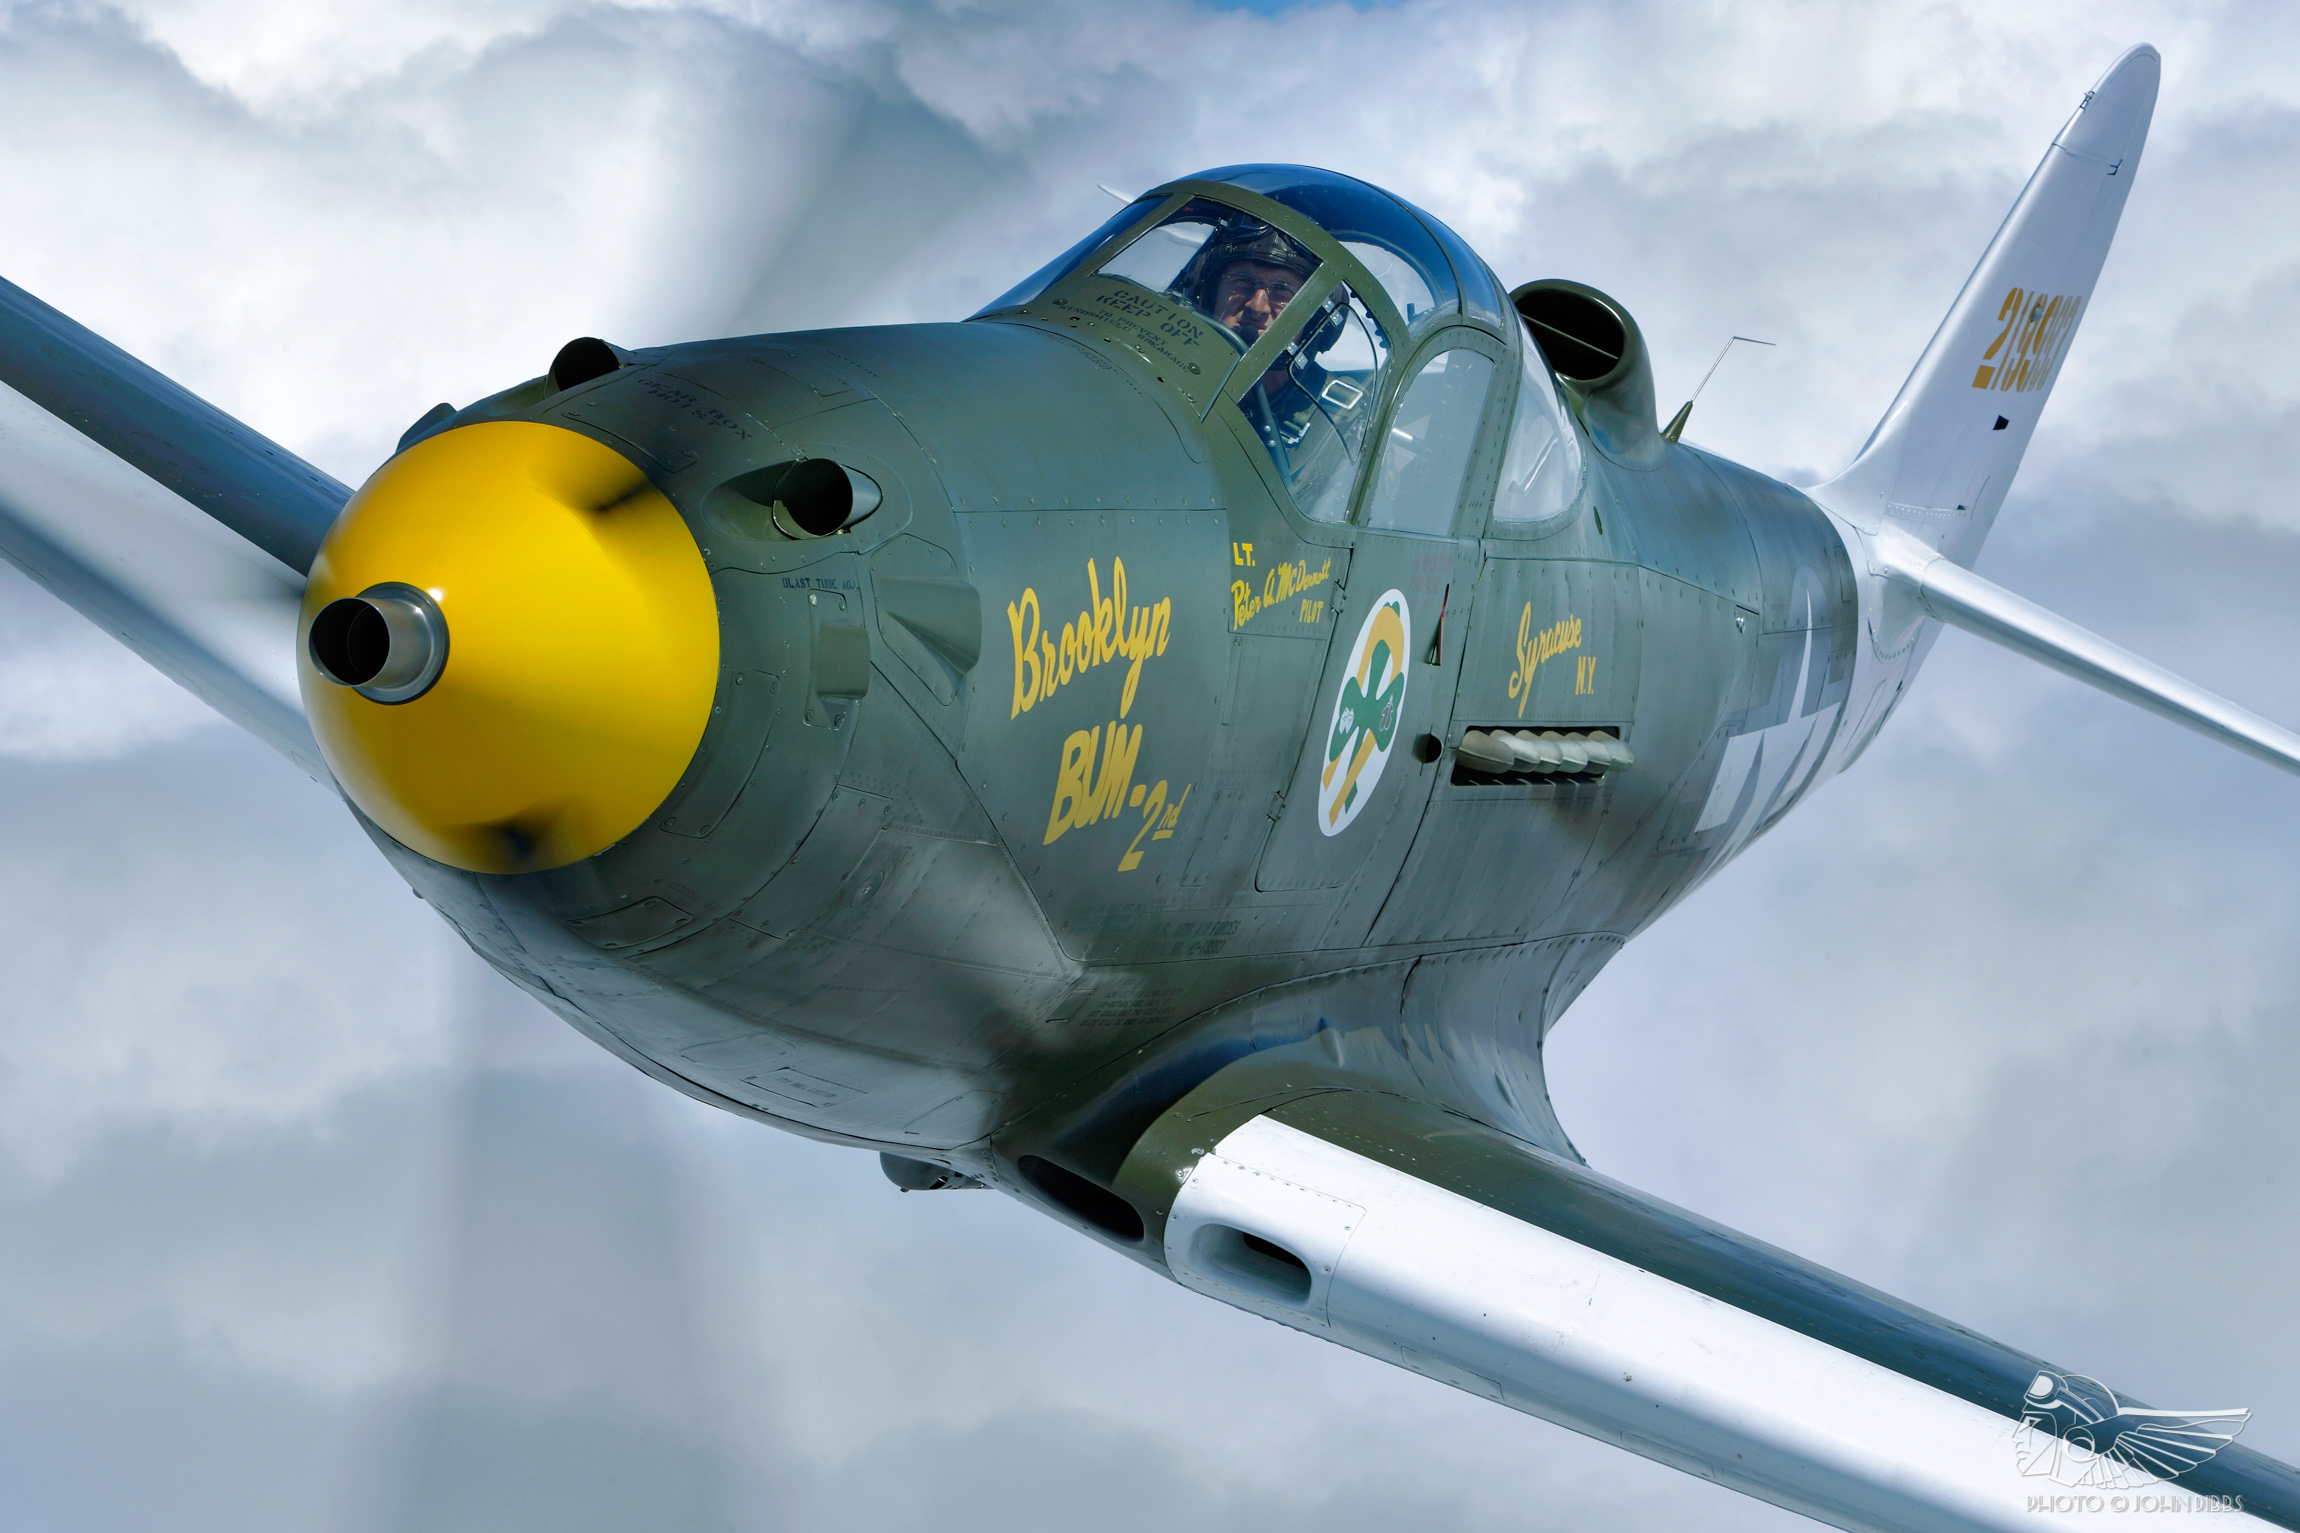 P-39 Airacobra EP | Page 5 | RealFlight Forums